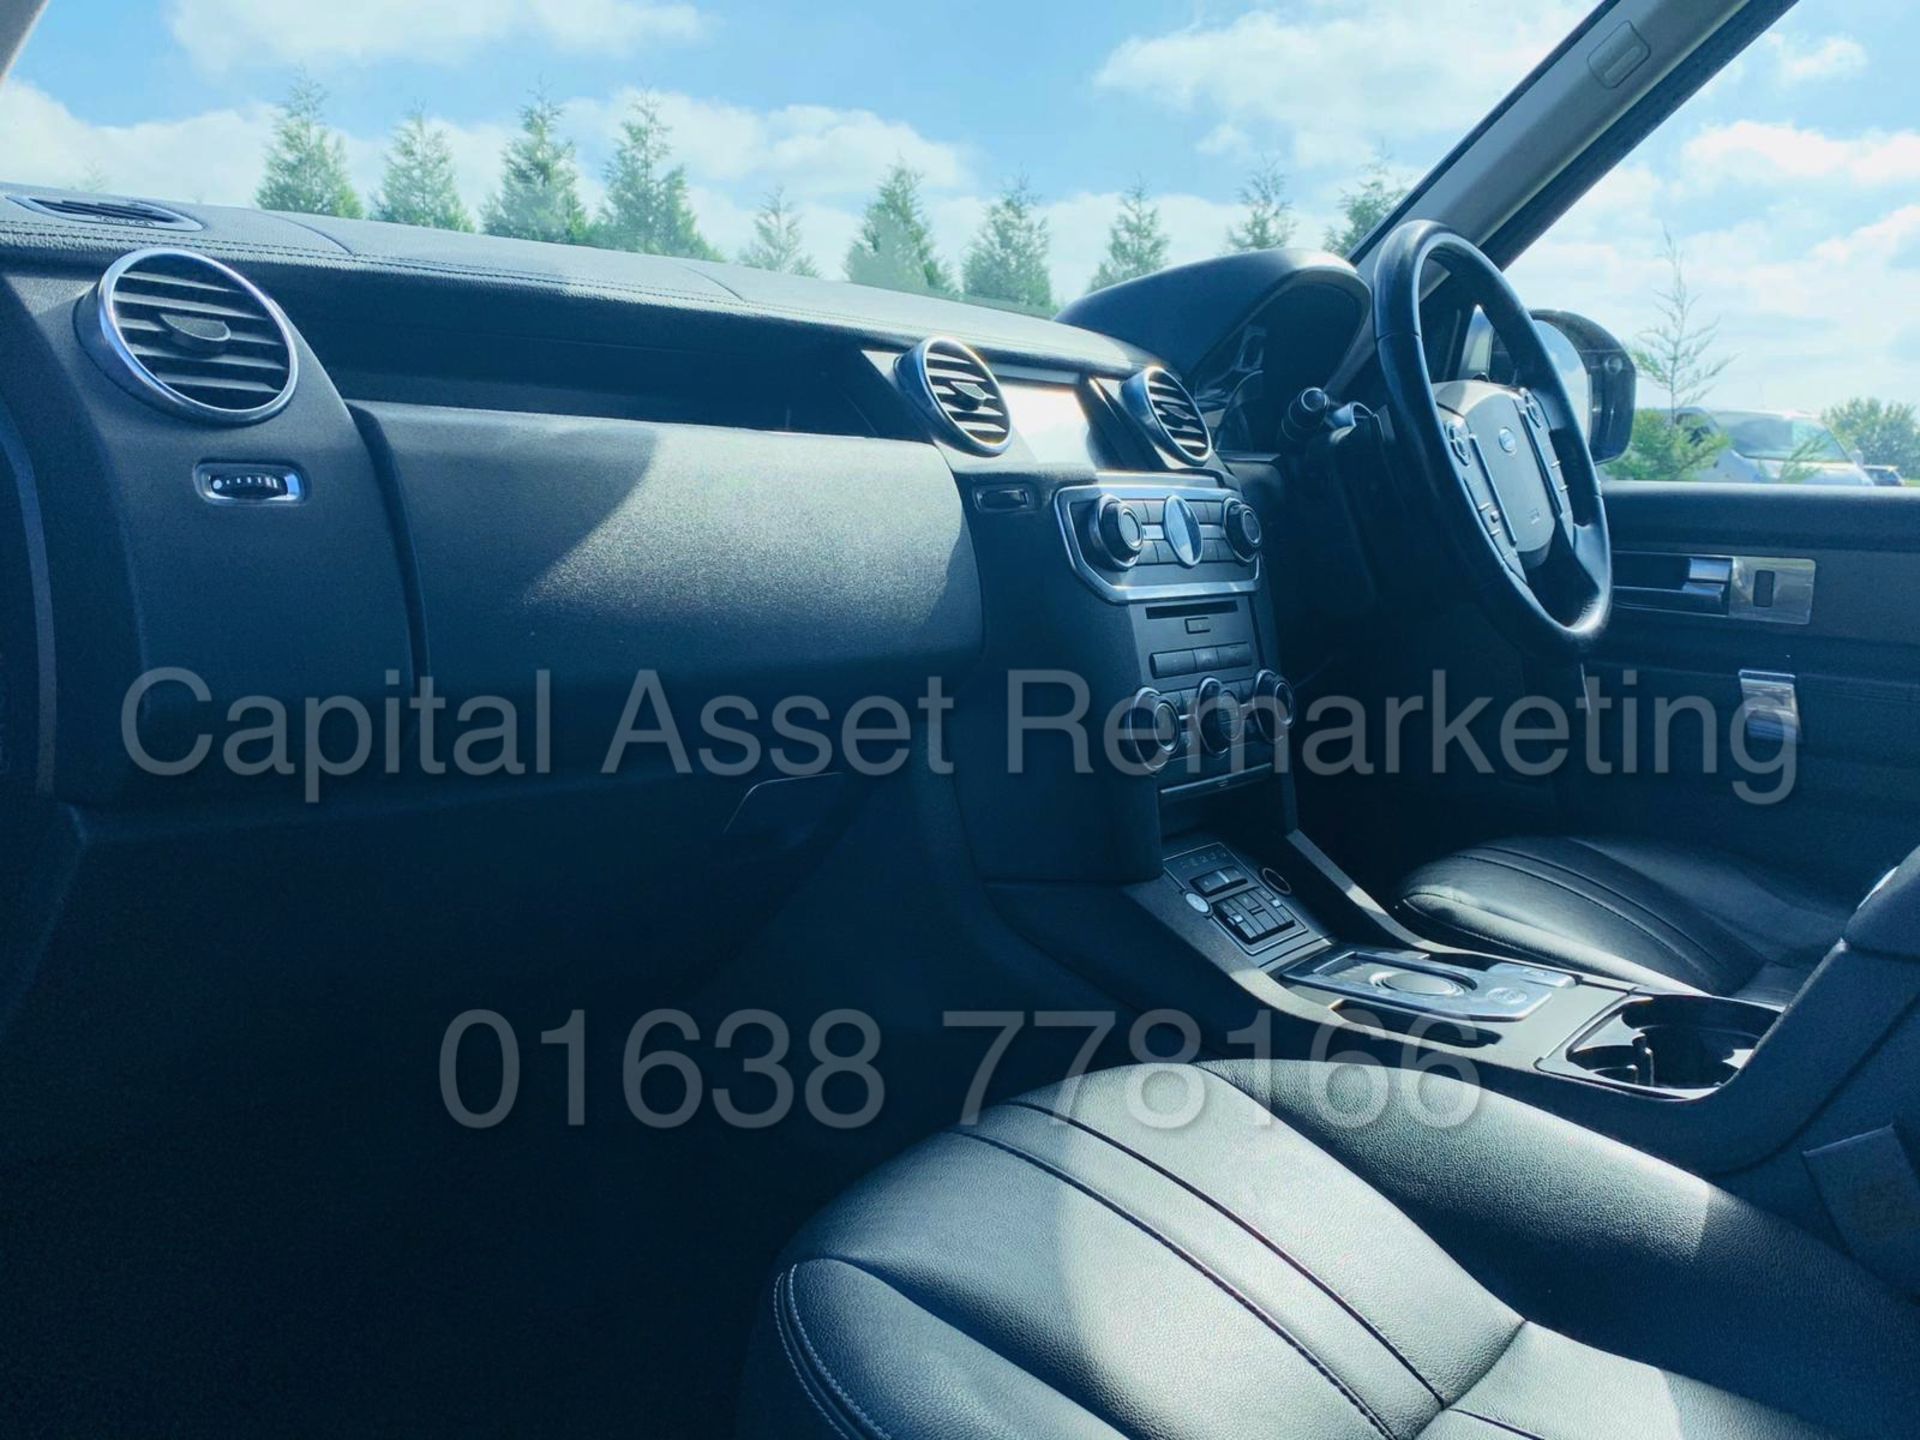 LAND ROVER DISCOVERY *XS EDITION* (2014) '3.0 SDV6 - 255 BHP - 8 SPEED AUTO' *LEATHER & SAT NAV* - Image 23 of 50